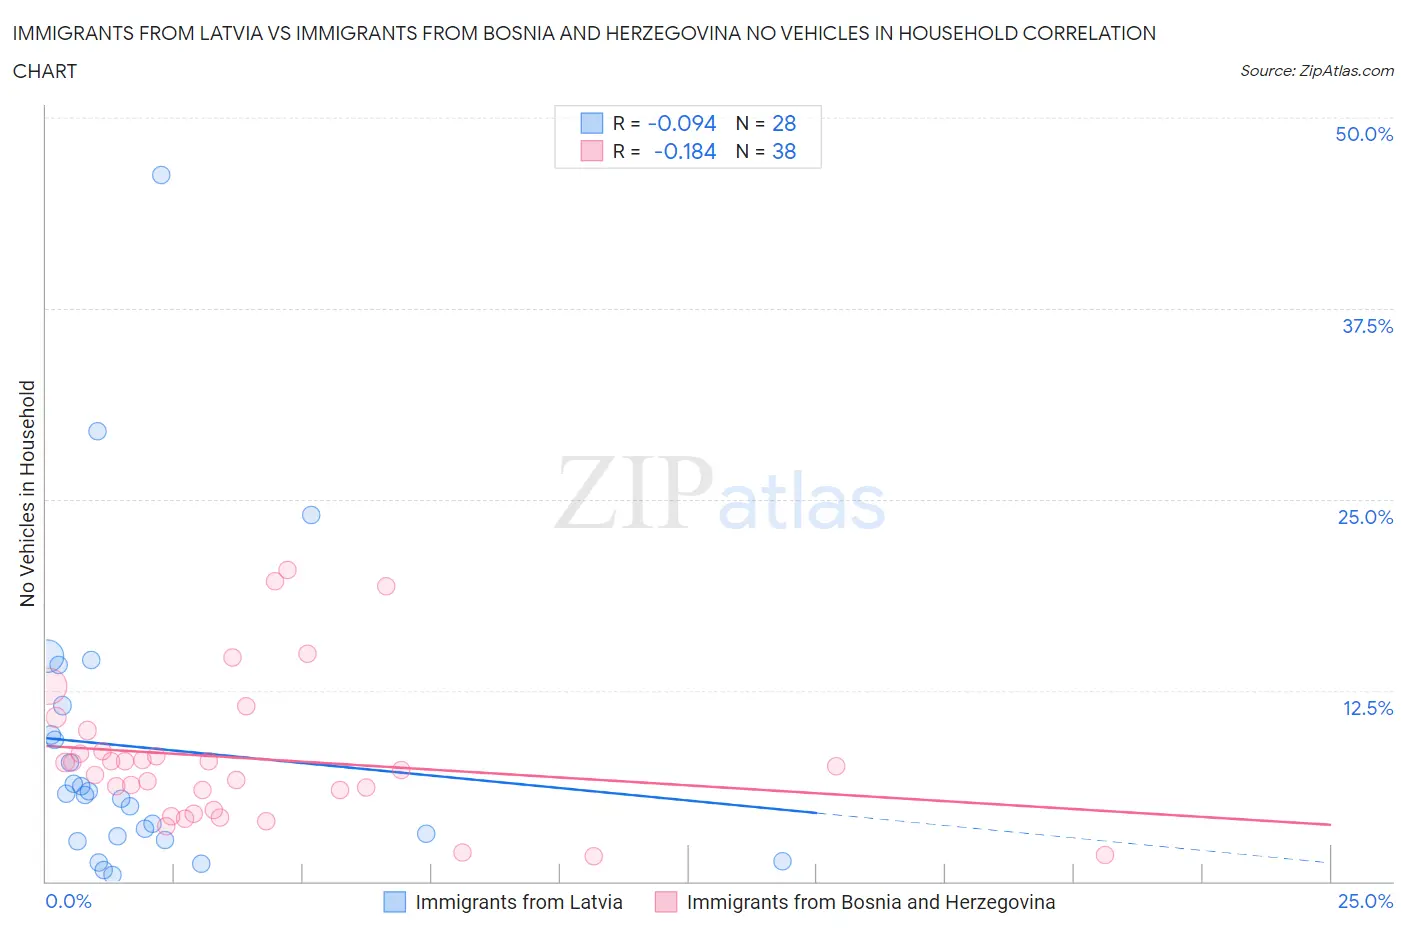 Immigrants from Latvia vs Immigrants from Bosnia and Herzegovina No Vehicles in Household